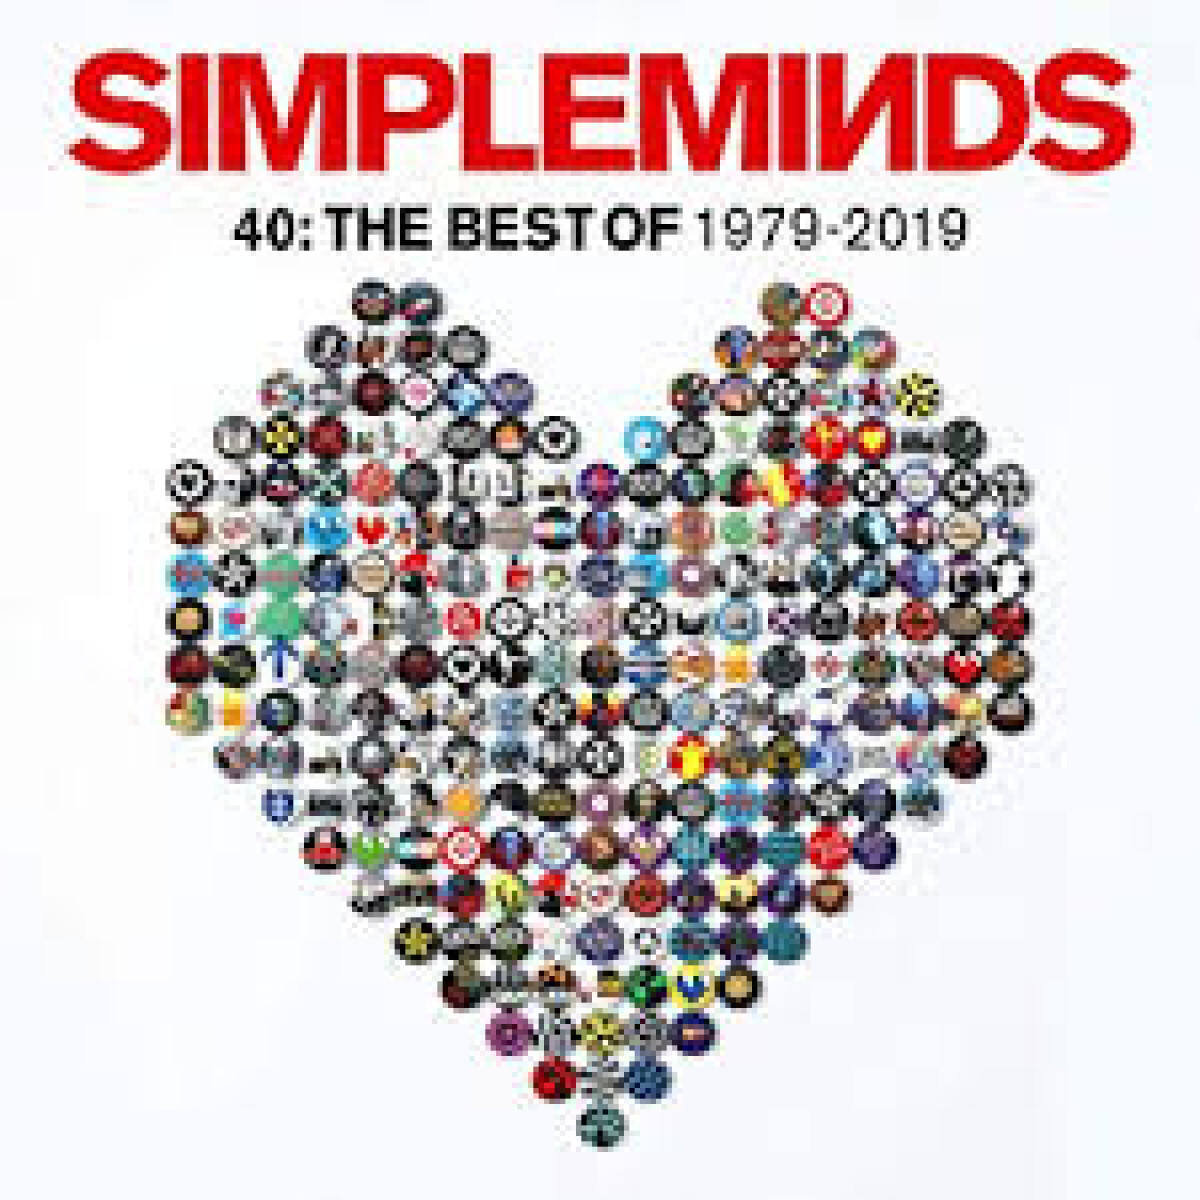 Simple Minds - 40: The Best Of 1979-2019 - Vinilo 